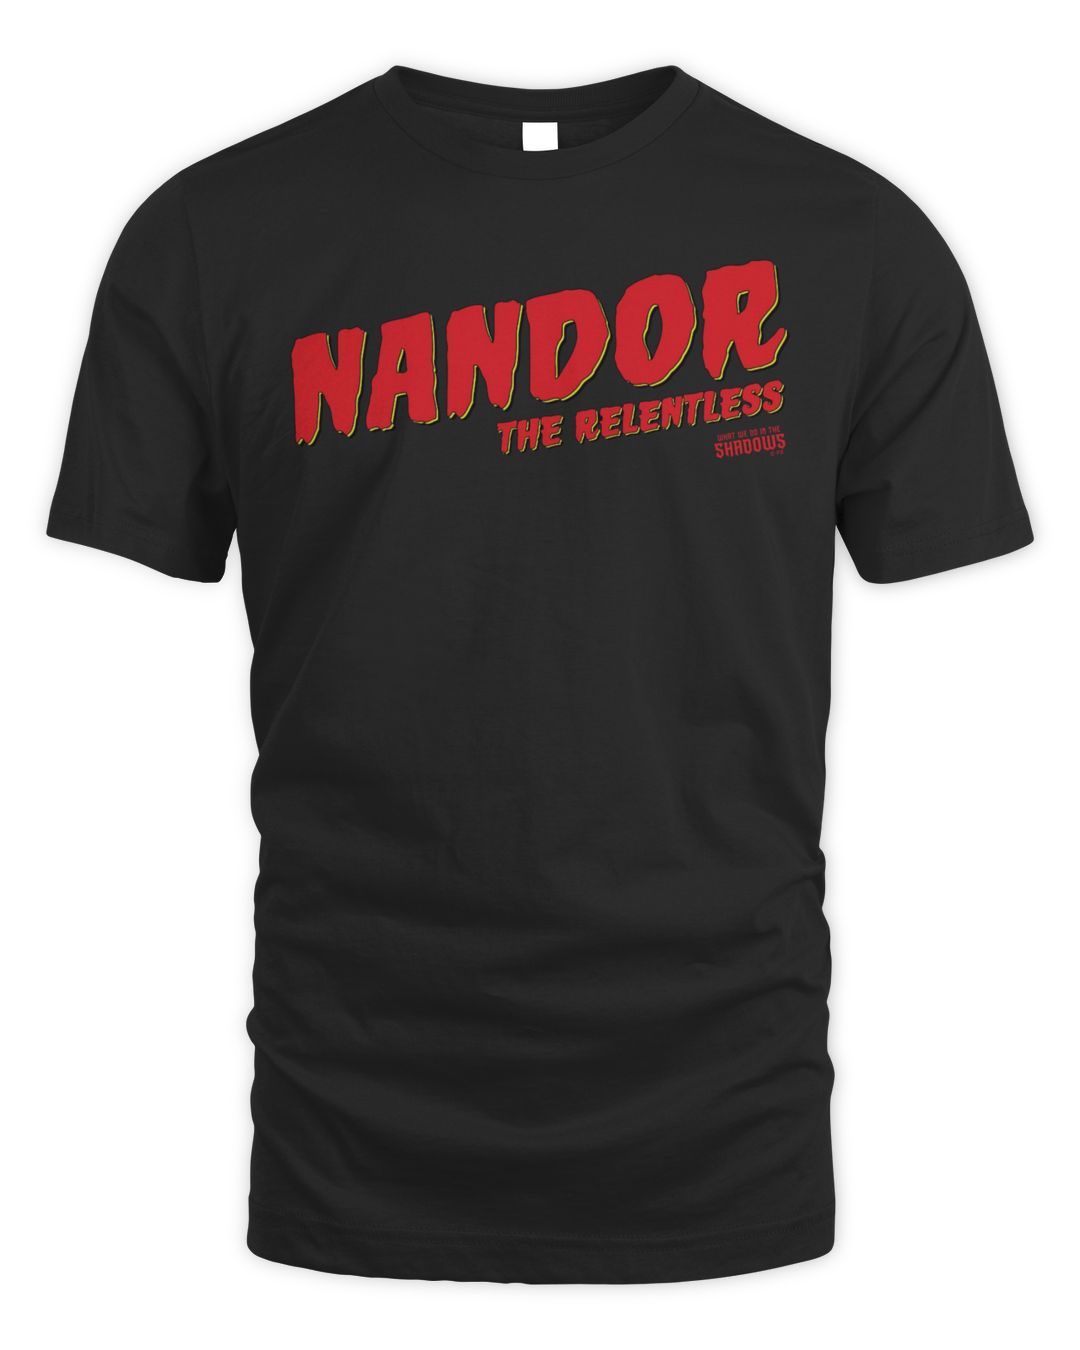 What We Do In The Shadows Merch Nandor The Relentless Shirt